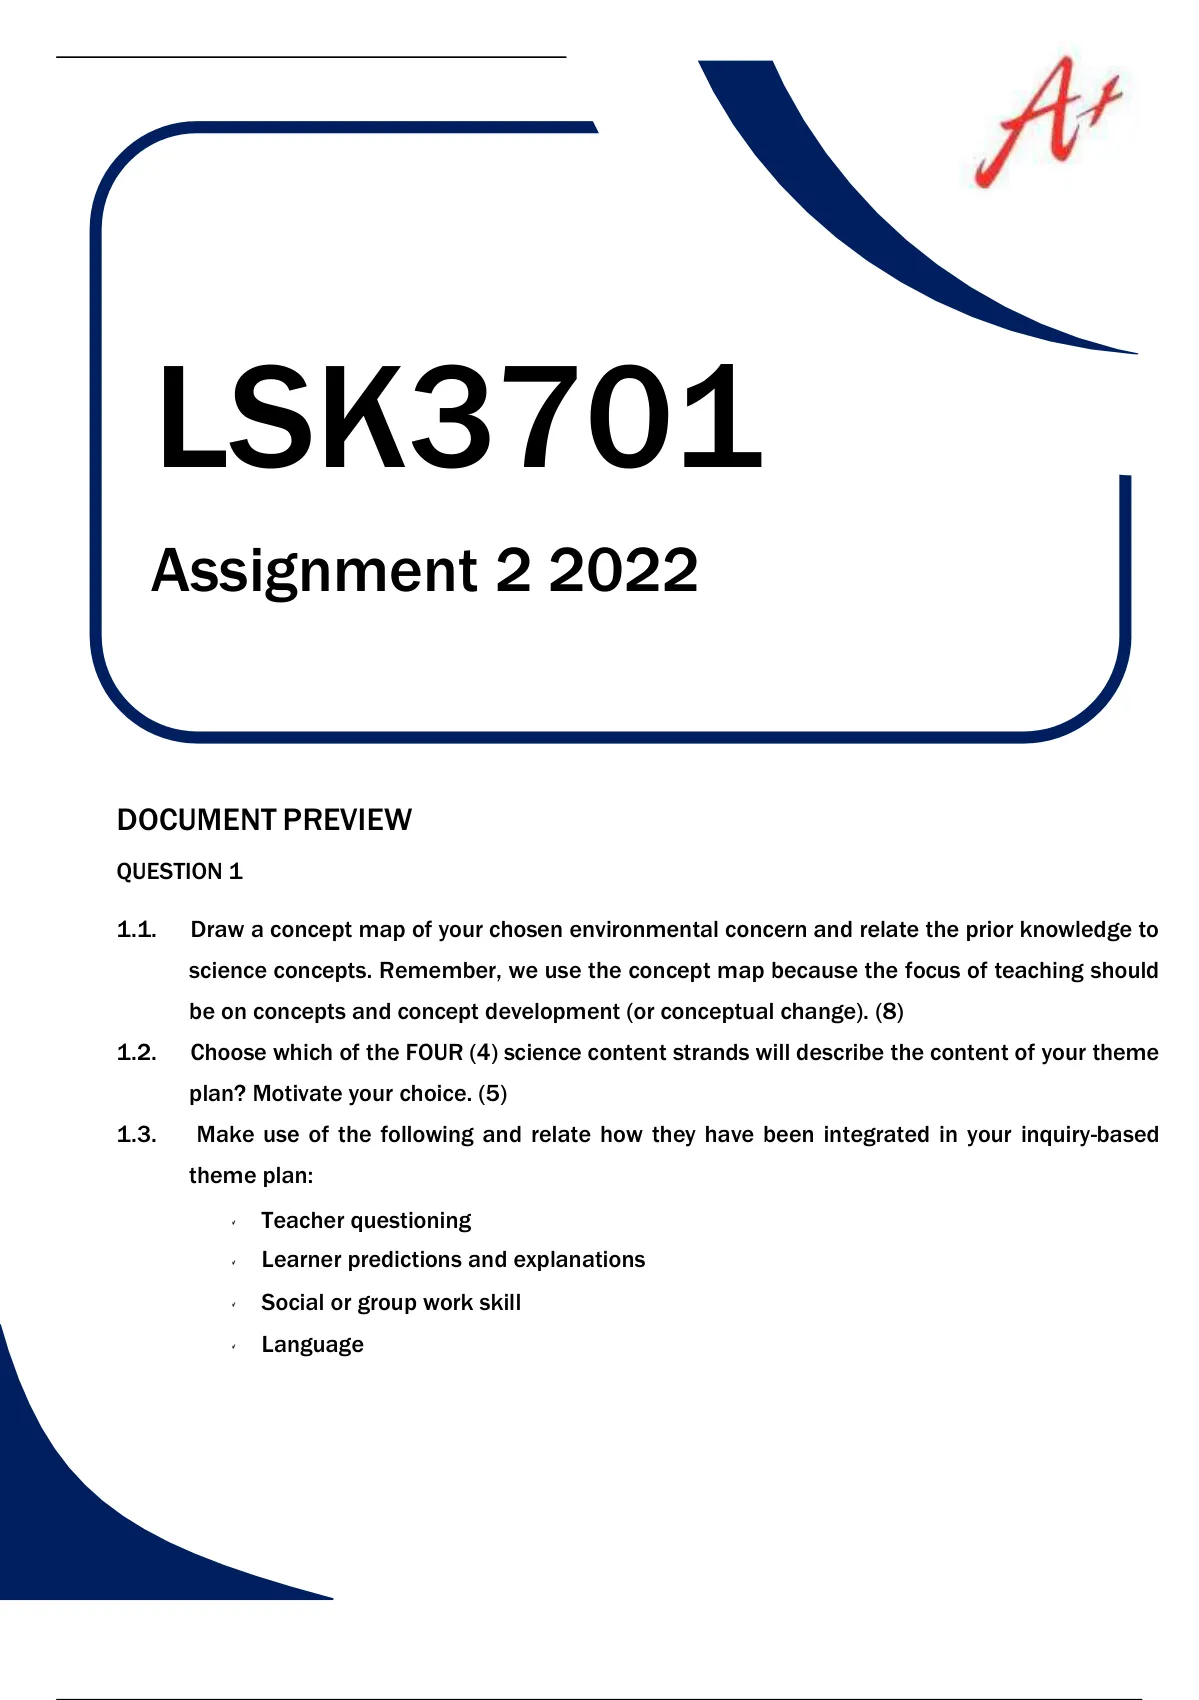 lsk3701 assignment 2 answers 2022